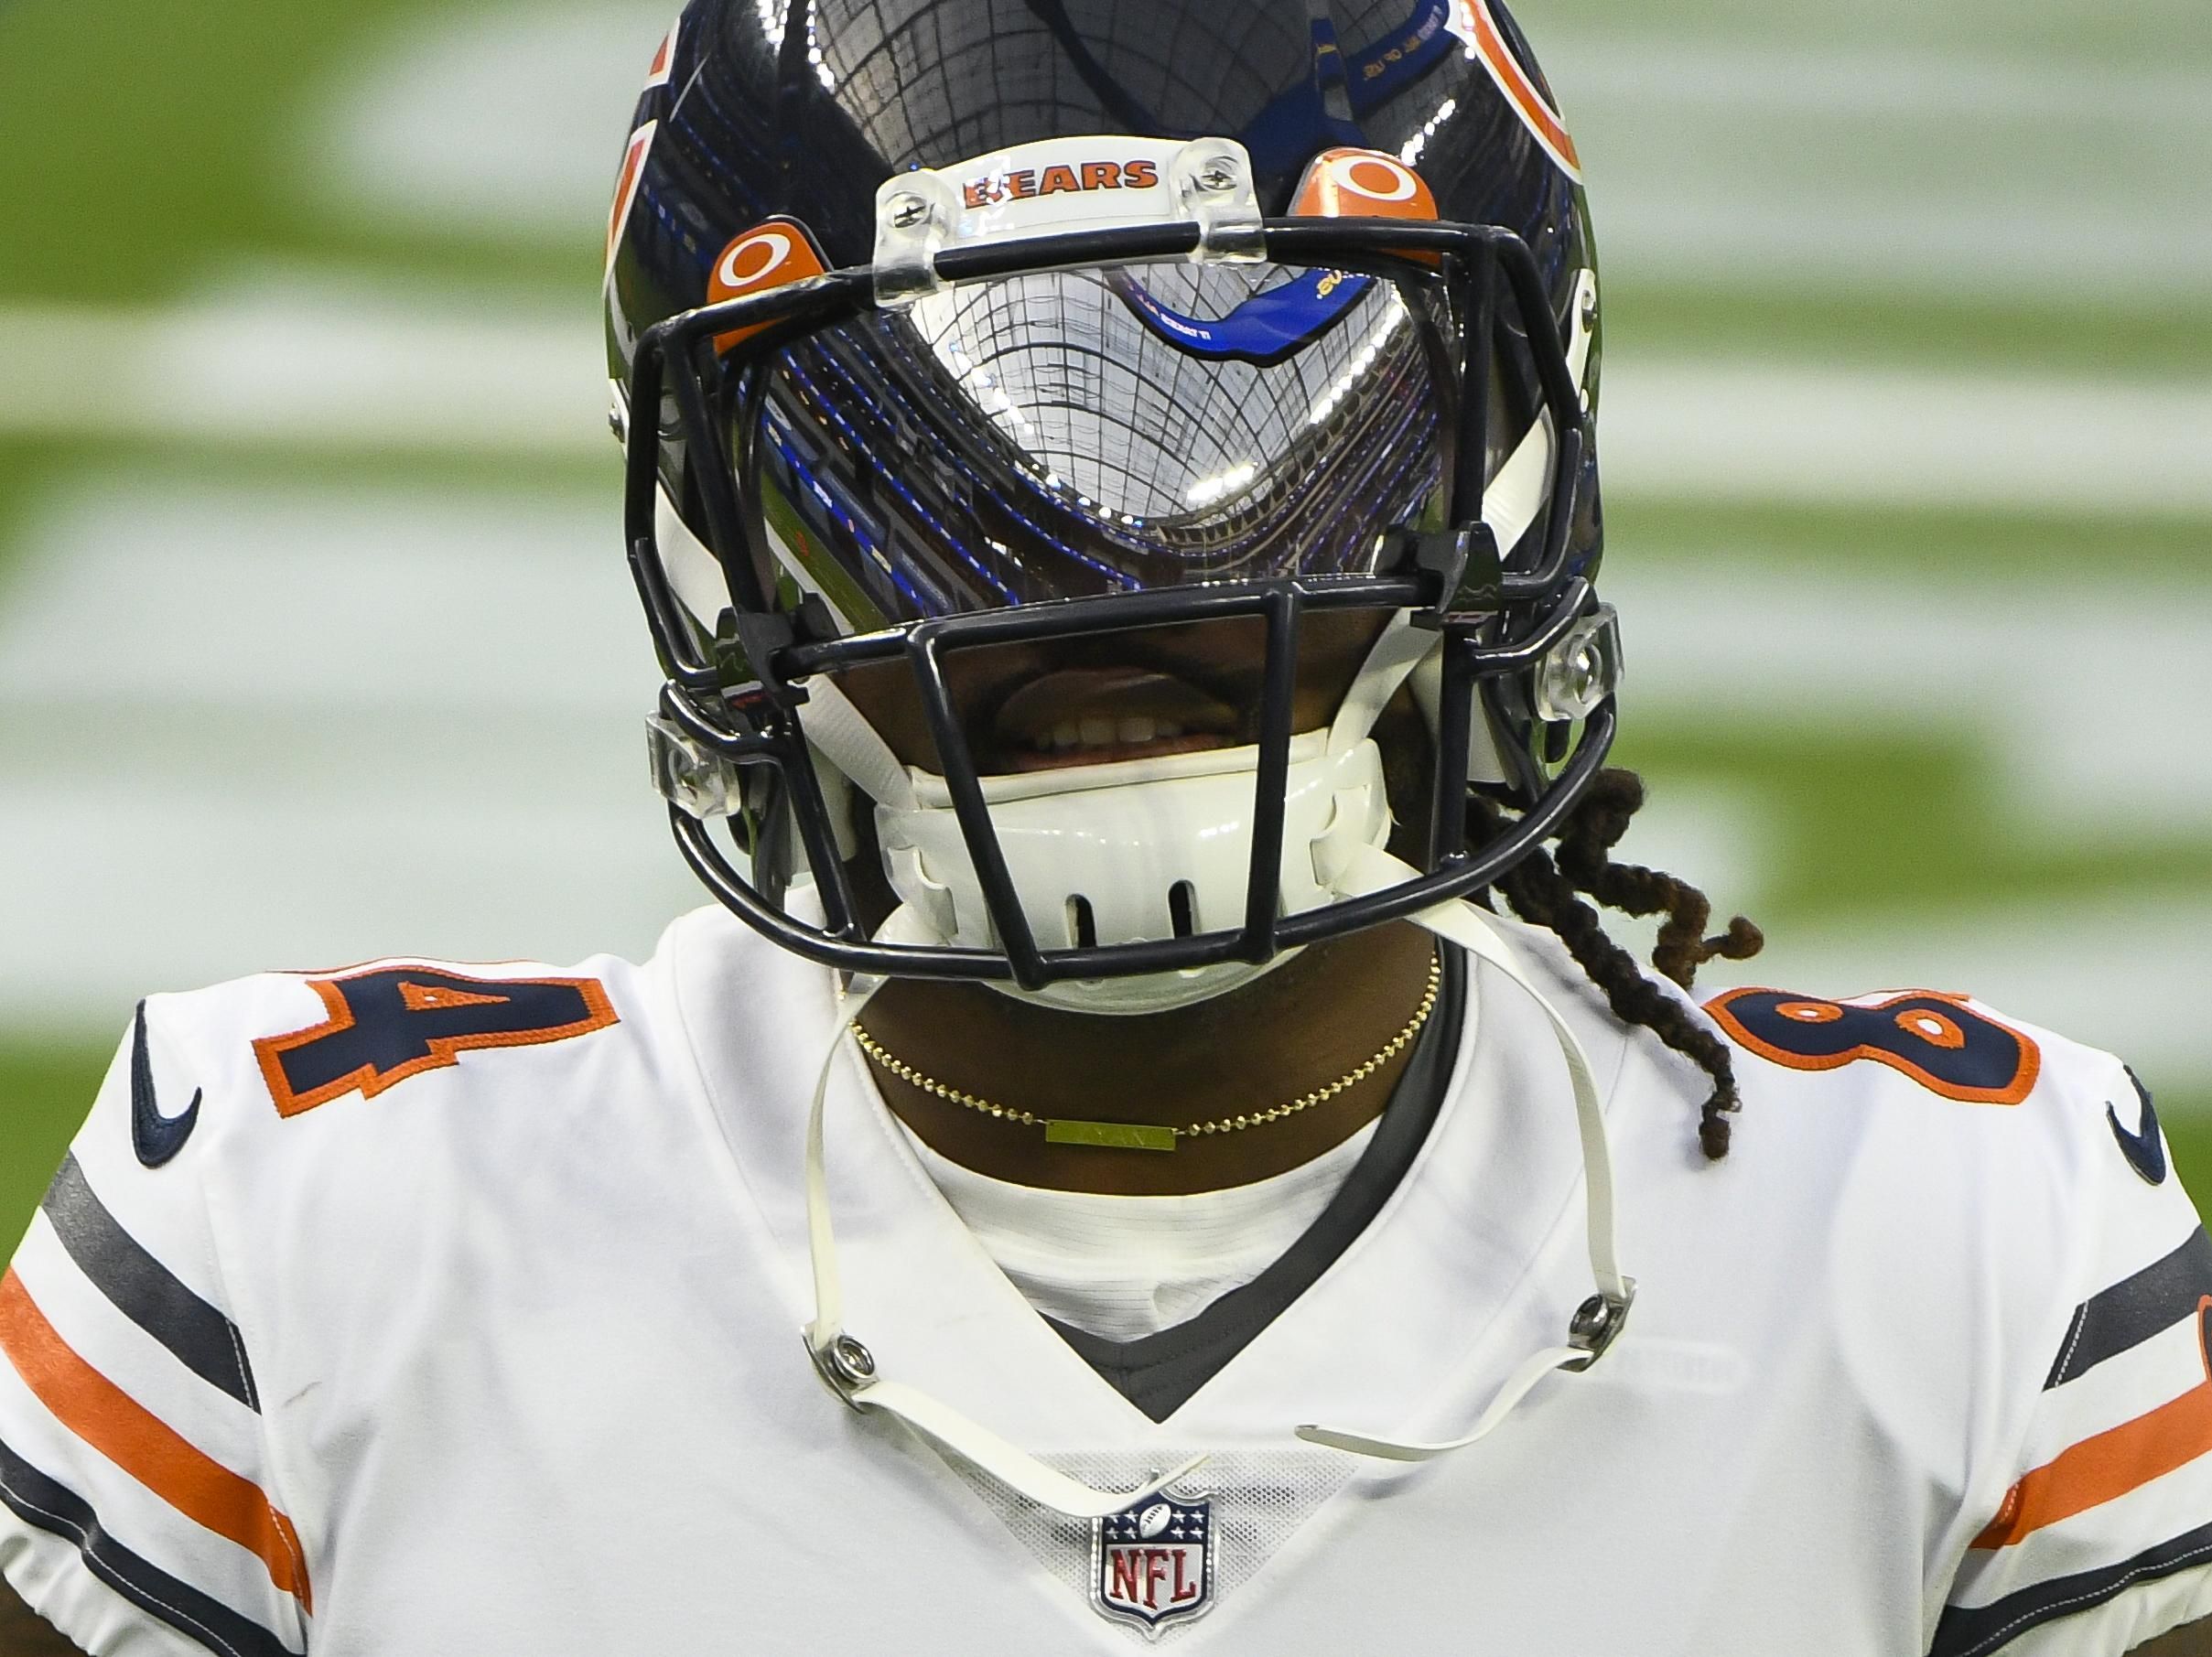 SoFi Stadium is reflected in the visor of Chicago Bears wide receiver Cordarrelle Patterson during pregame warmups before playing the Los Angeles Rams.